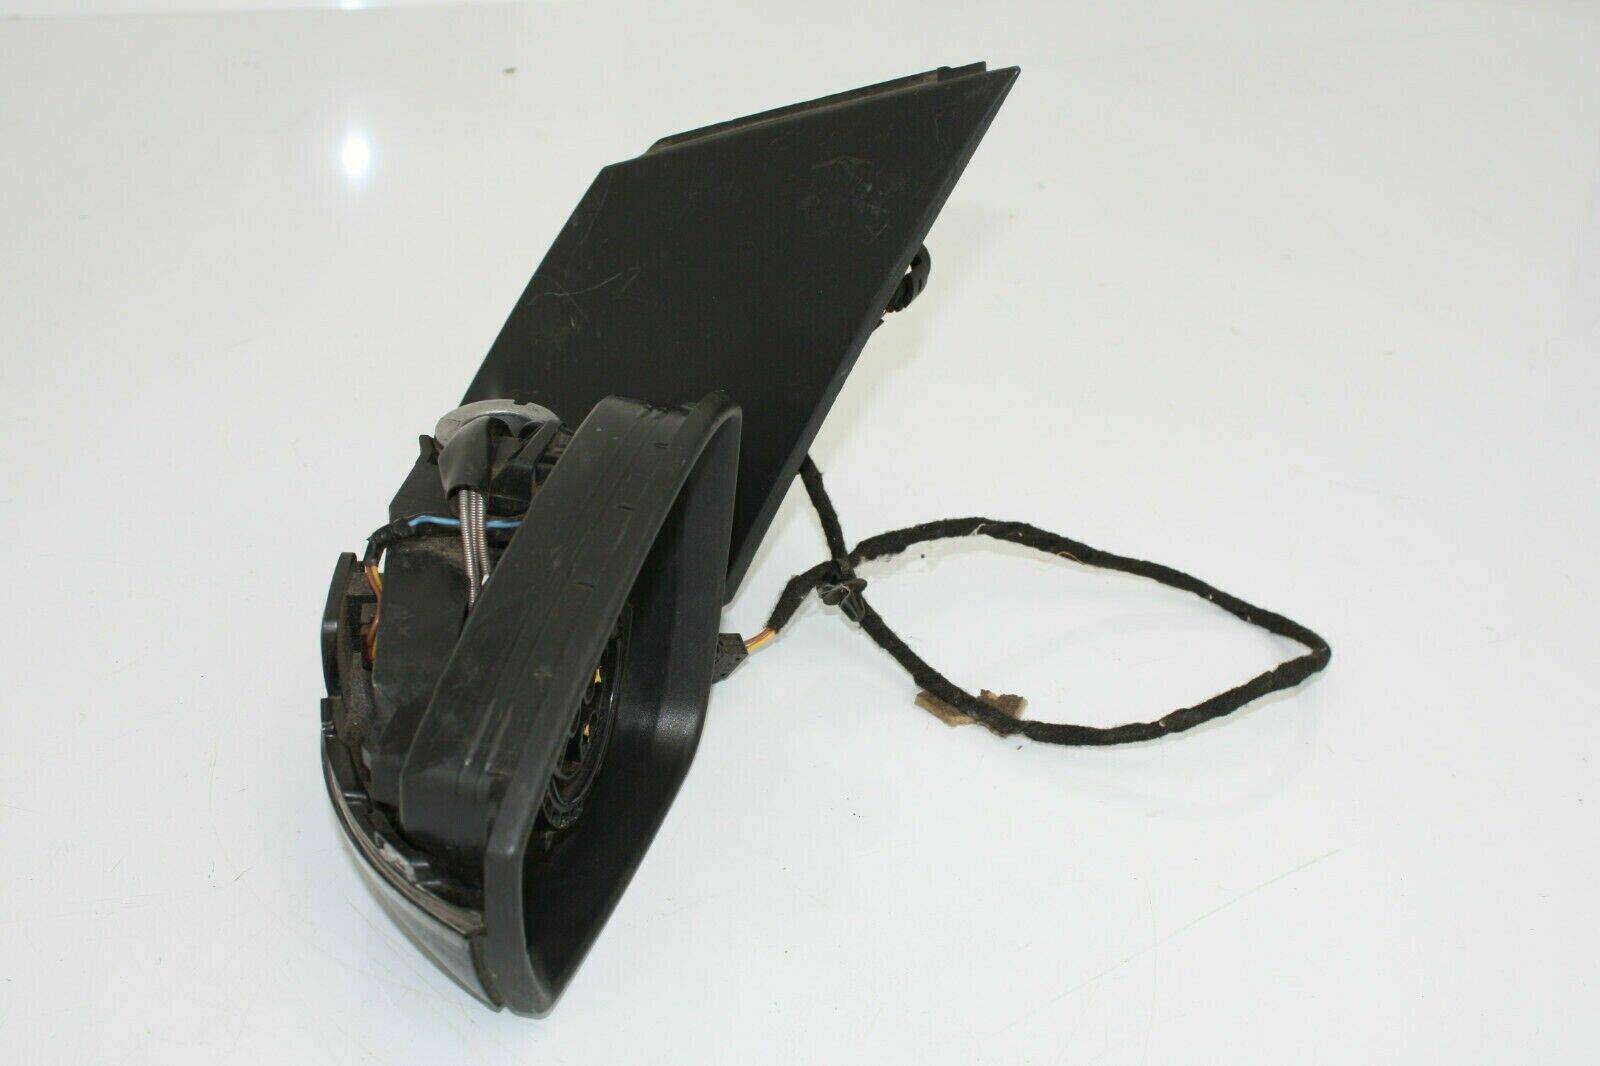 VOLKSWAGEN-POLO-WING-MIRROR-LEFT-2009-TO-2014-175421234513-2